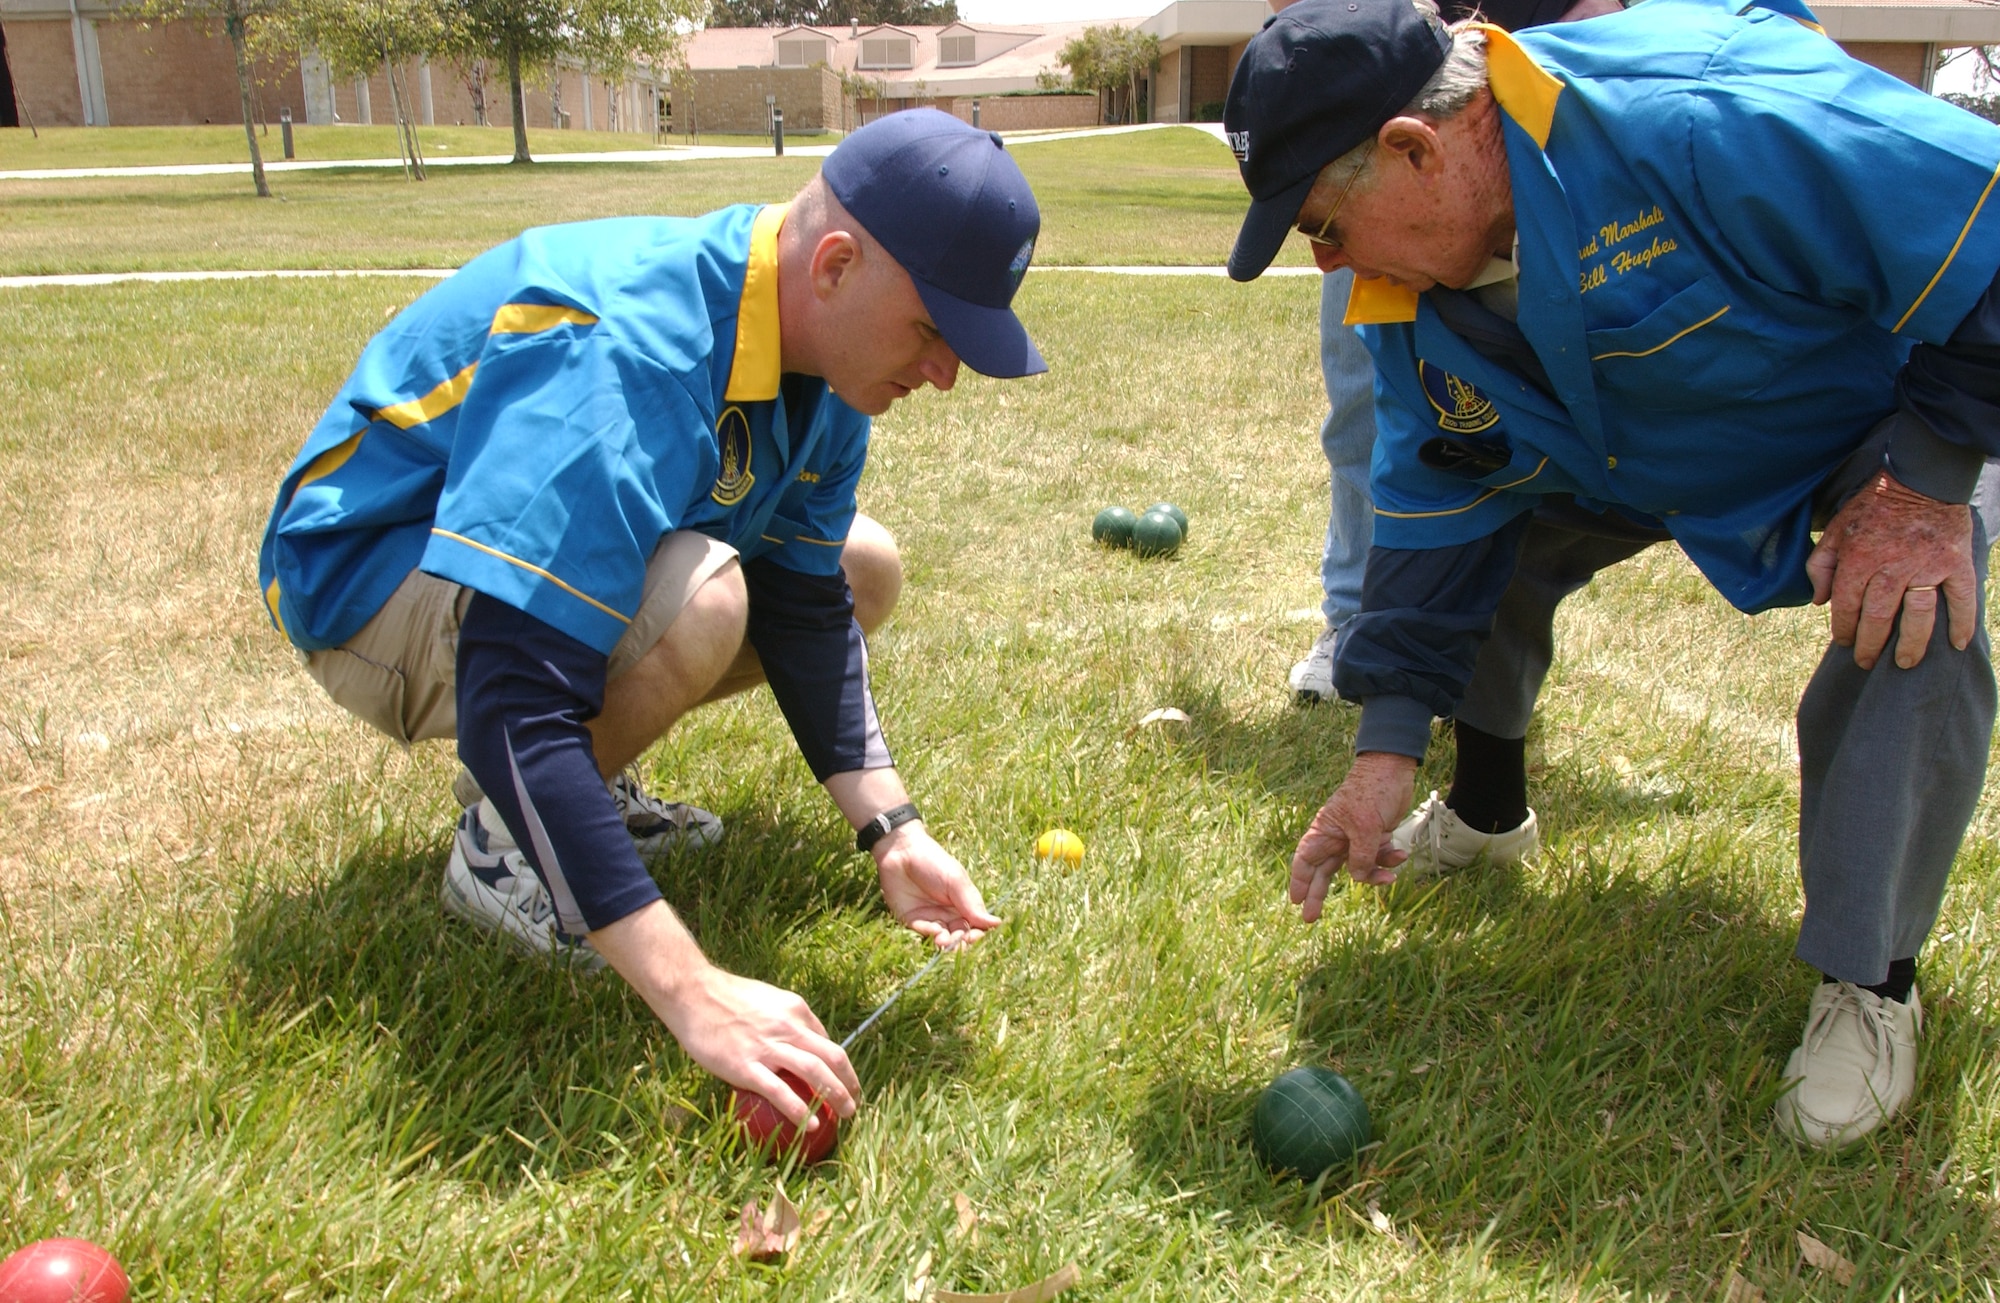 Master Sgt. Thomas "O'Malley Factor" O'Malley and referee Bill Huges from the Santa Maria Lawn Bowling Club use a measuring rod to determine whose ball is closer to the pallino, or marker, during the Combat Bocce Ball Tournament here May 4. The event was put on as one of the 381st TRG quarterly events to ensure morale stays high. (U.S. Air Force Photo by Nichelle Griffiths)